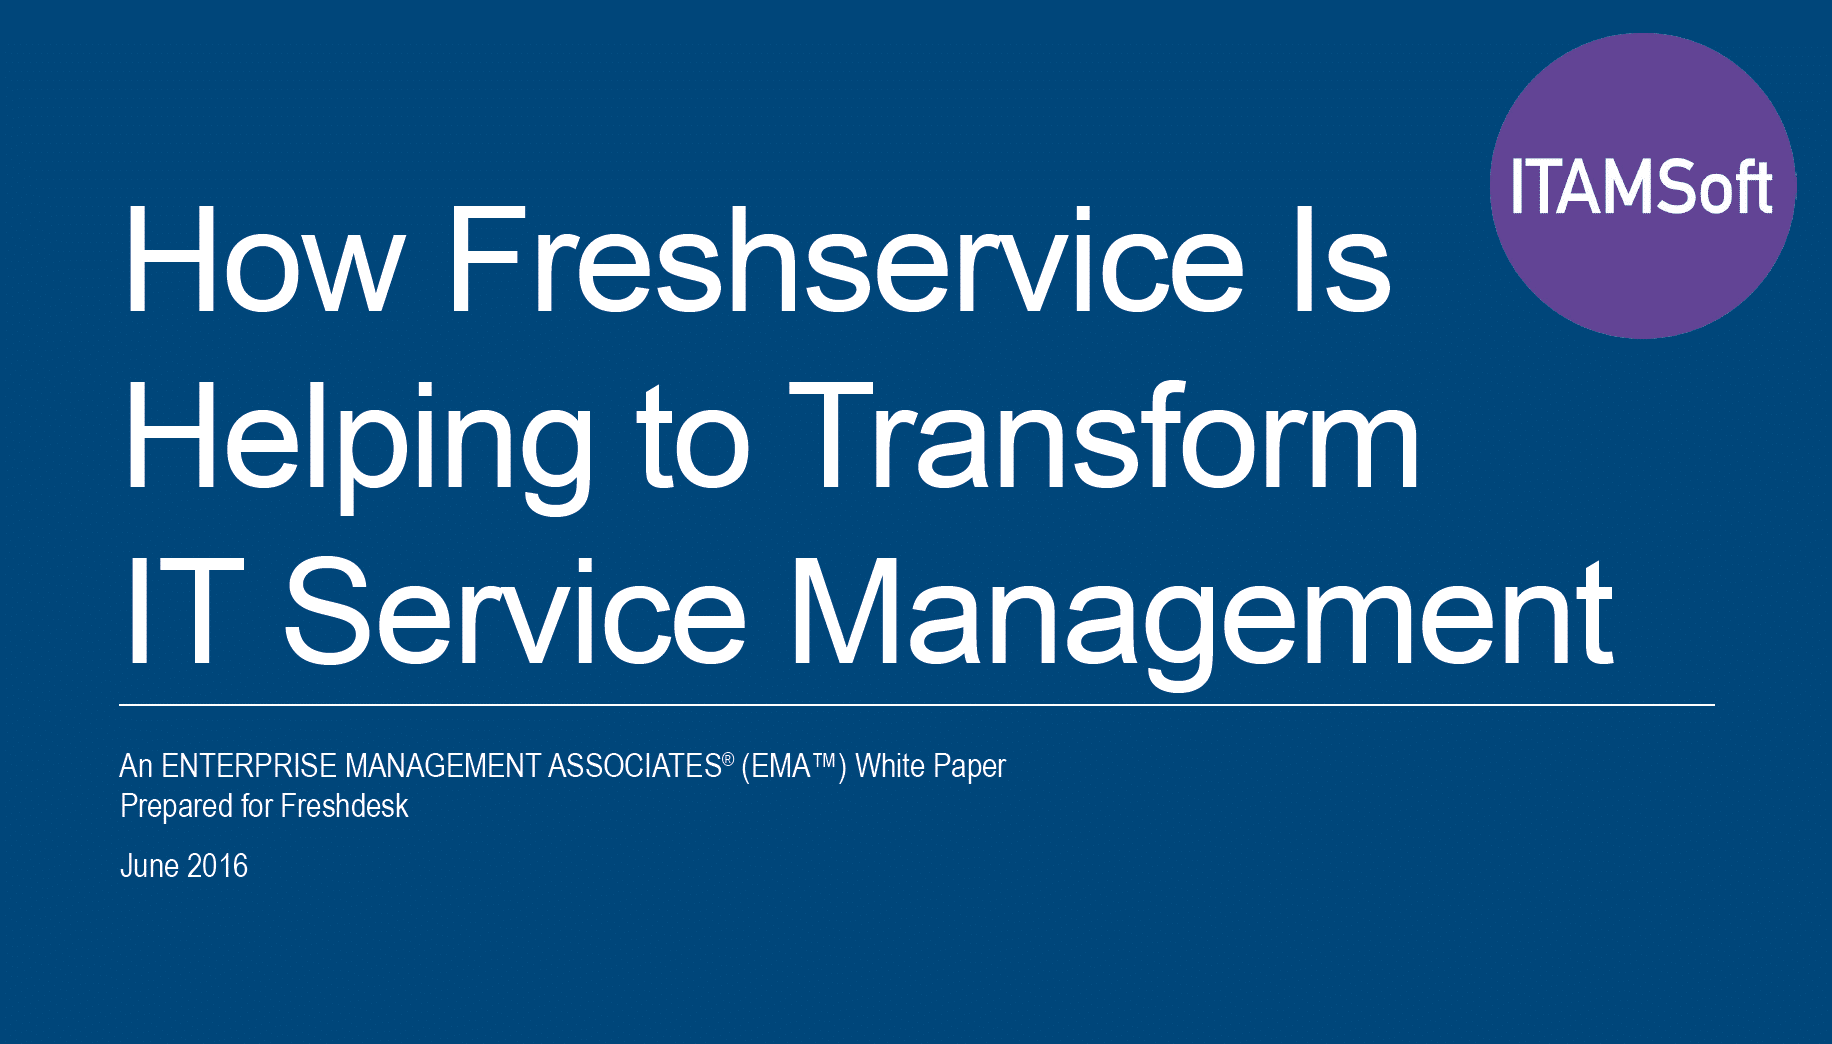 How Freshservice is Helping To Transform IT Service Management